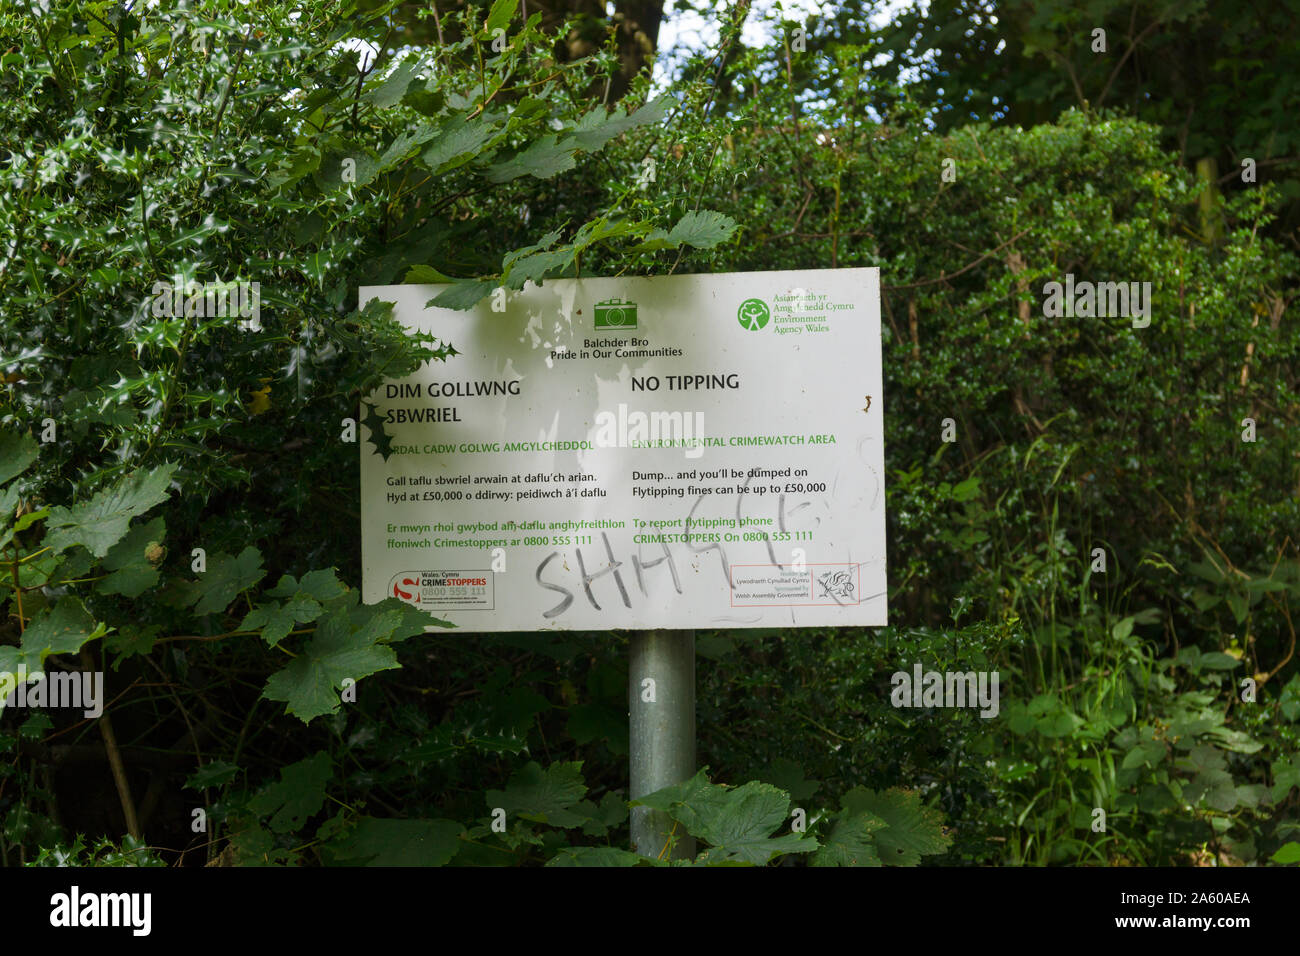 A defaced environmental crime watch area notice in English and Welsh posted by the Welsh government warning offenders of large fines for fly tipping Stock Photo